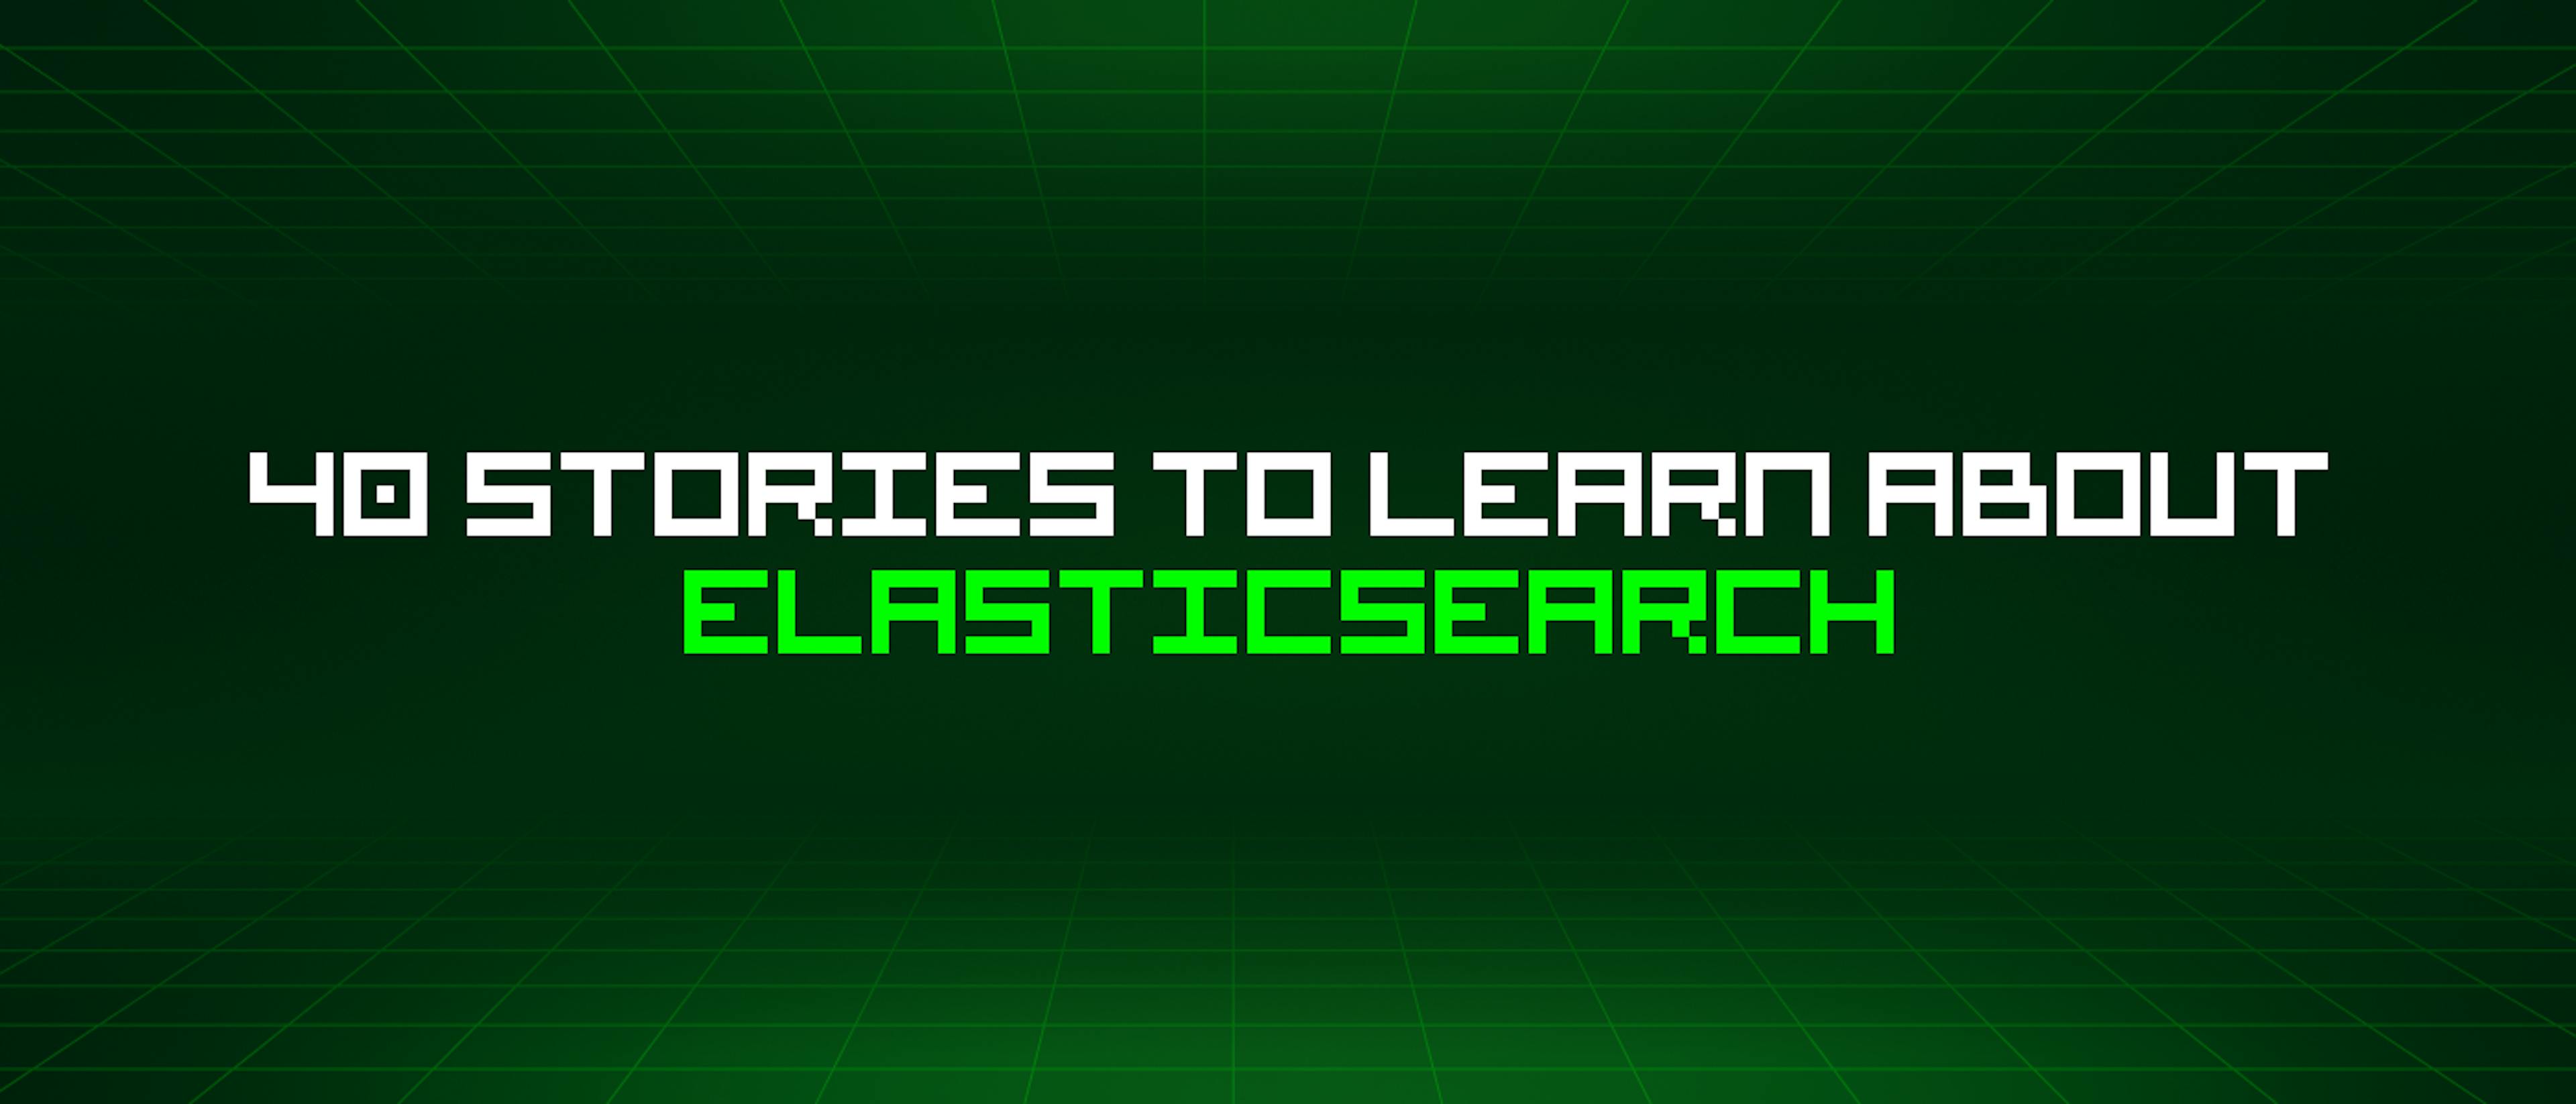 featured image - 40 Stories To Learn About Elasticsearch